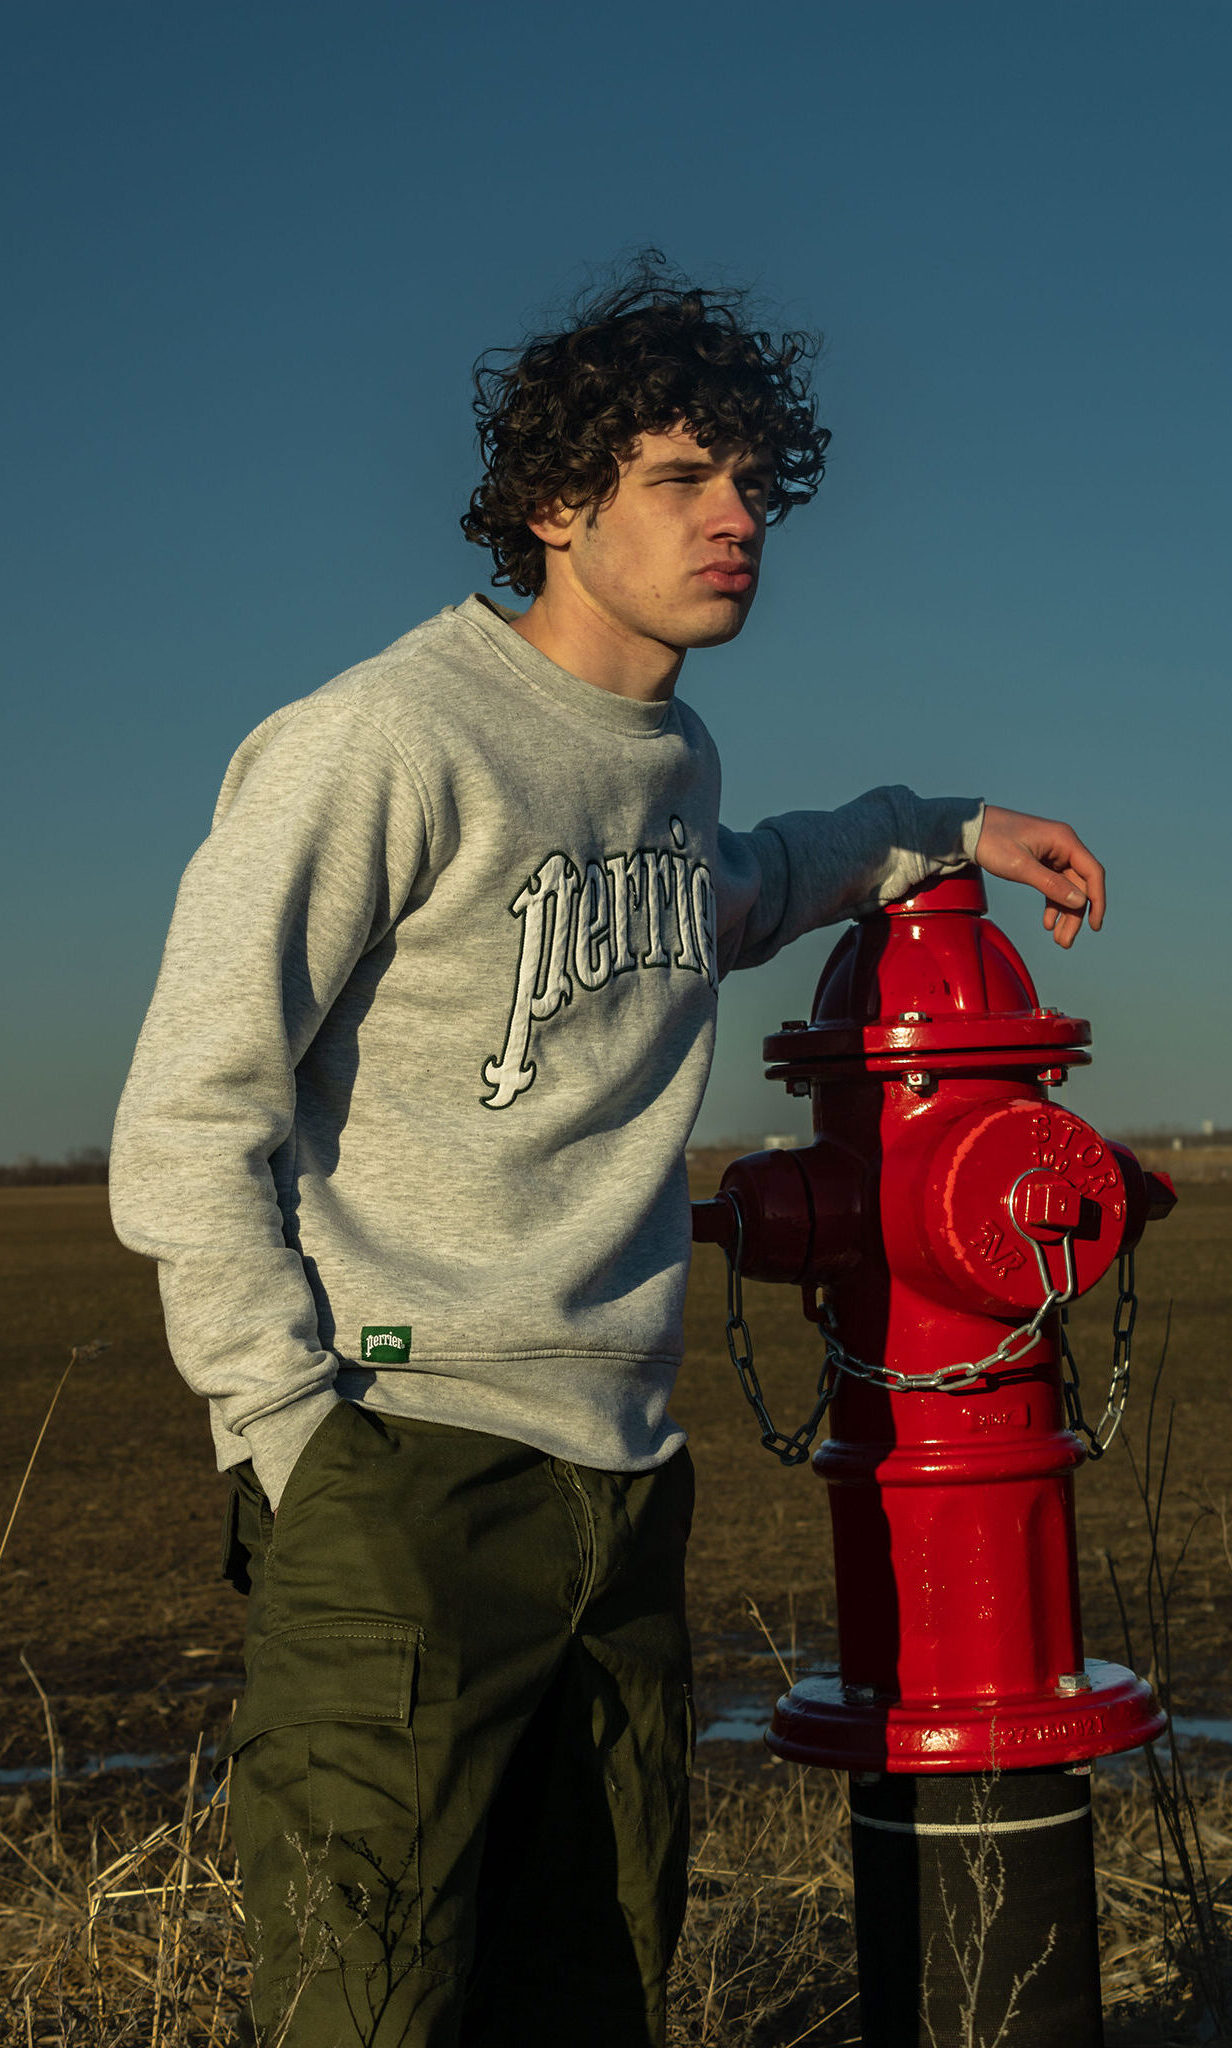 A teen boy in a grey sweatshirt stands in a field leaning against a bright red fire hydrant.